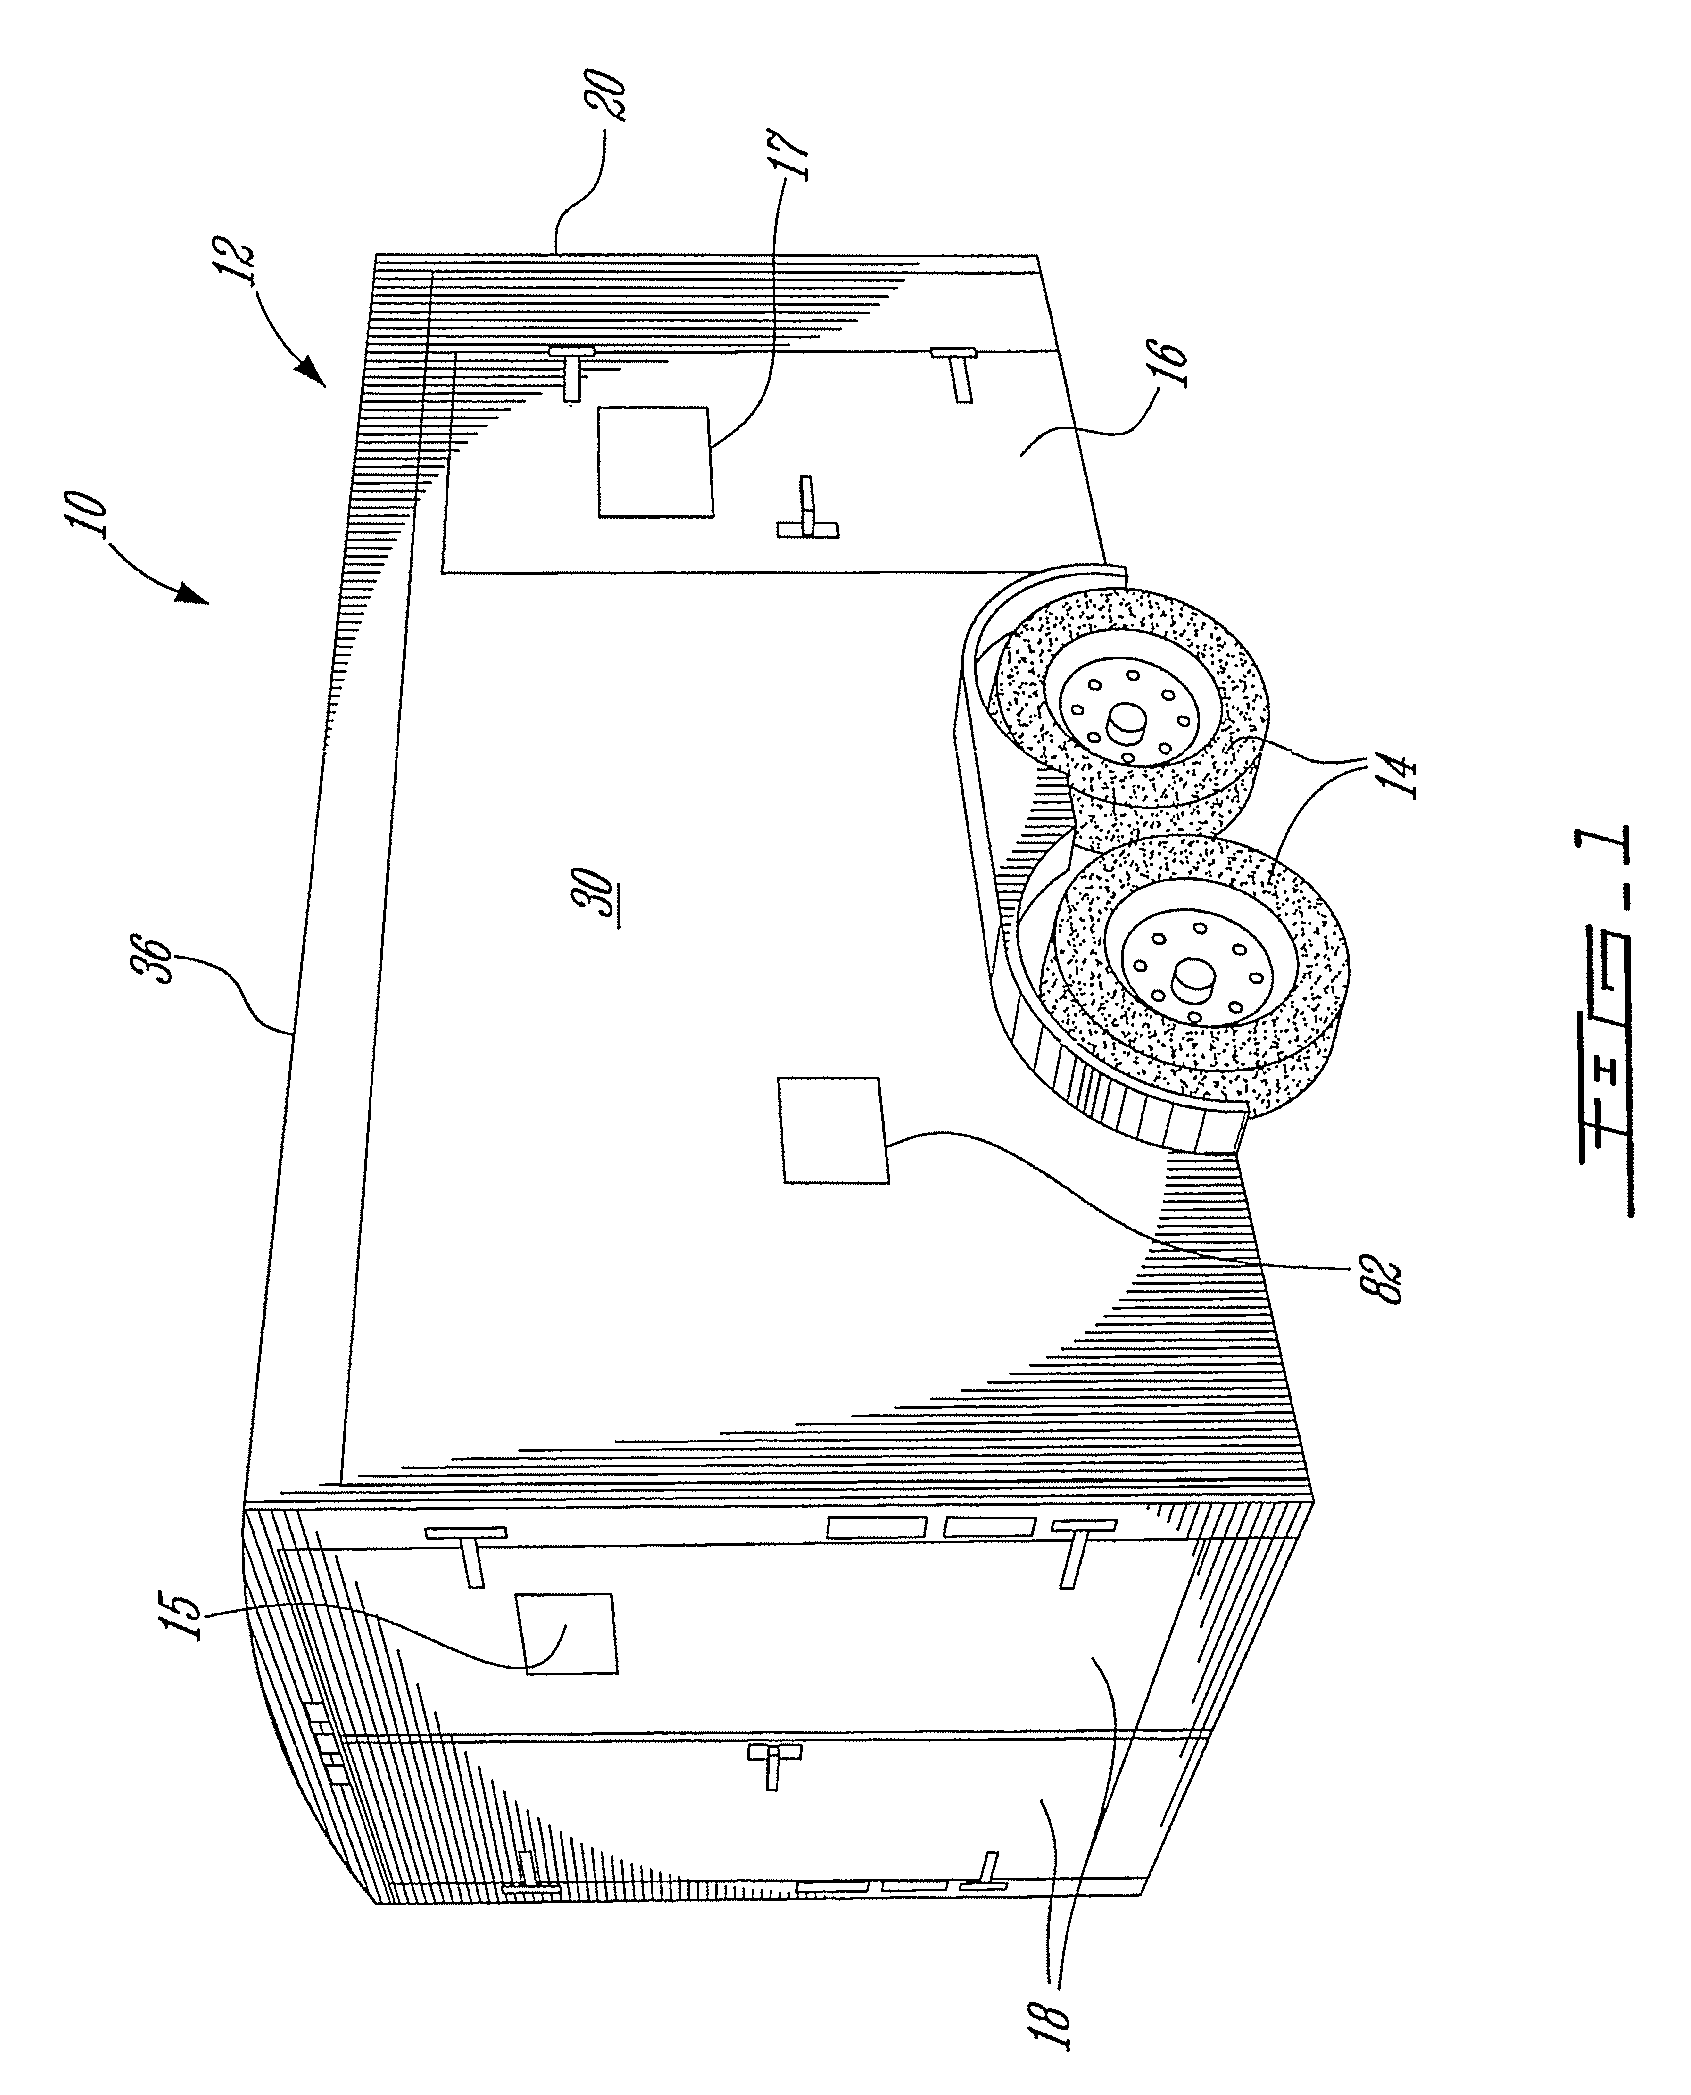 Apparatus for on-site microbial diagnosis and disinfection and method therefor